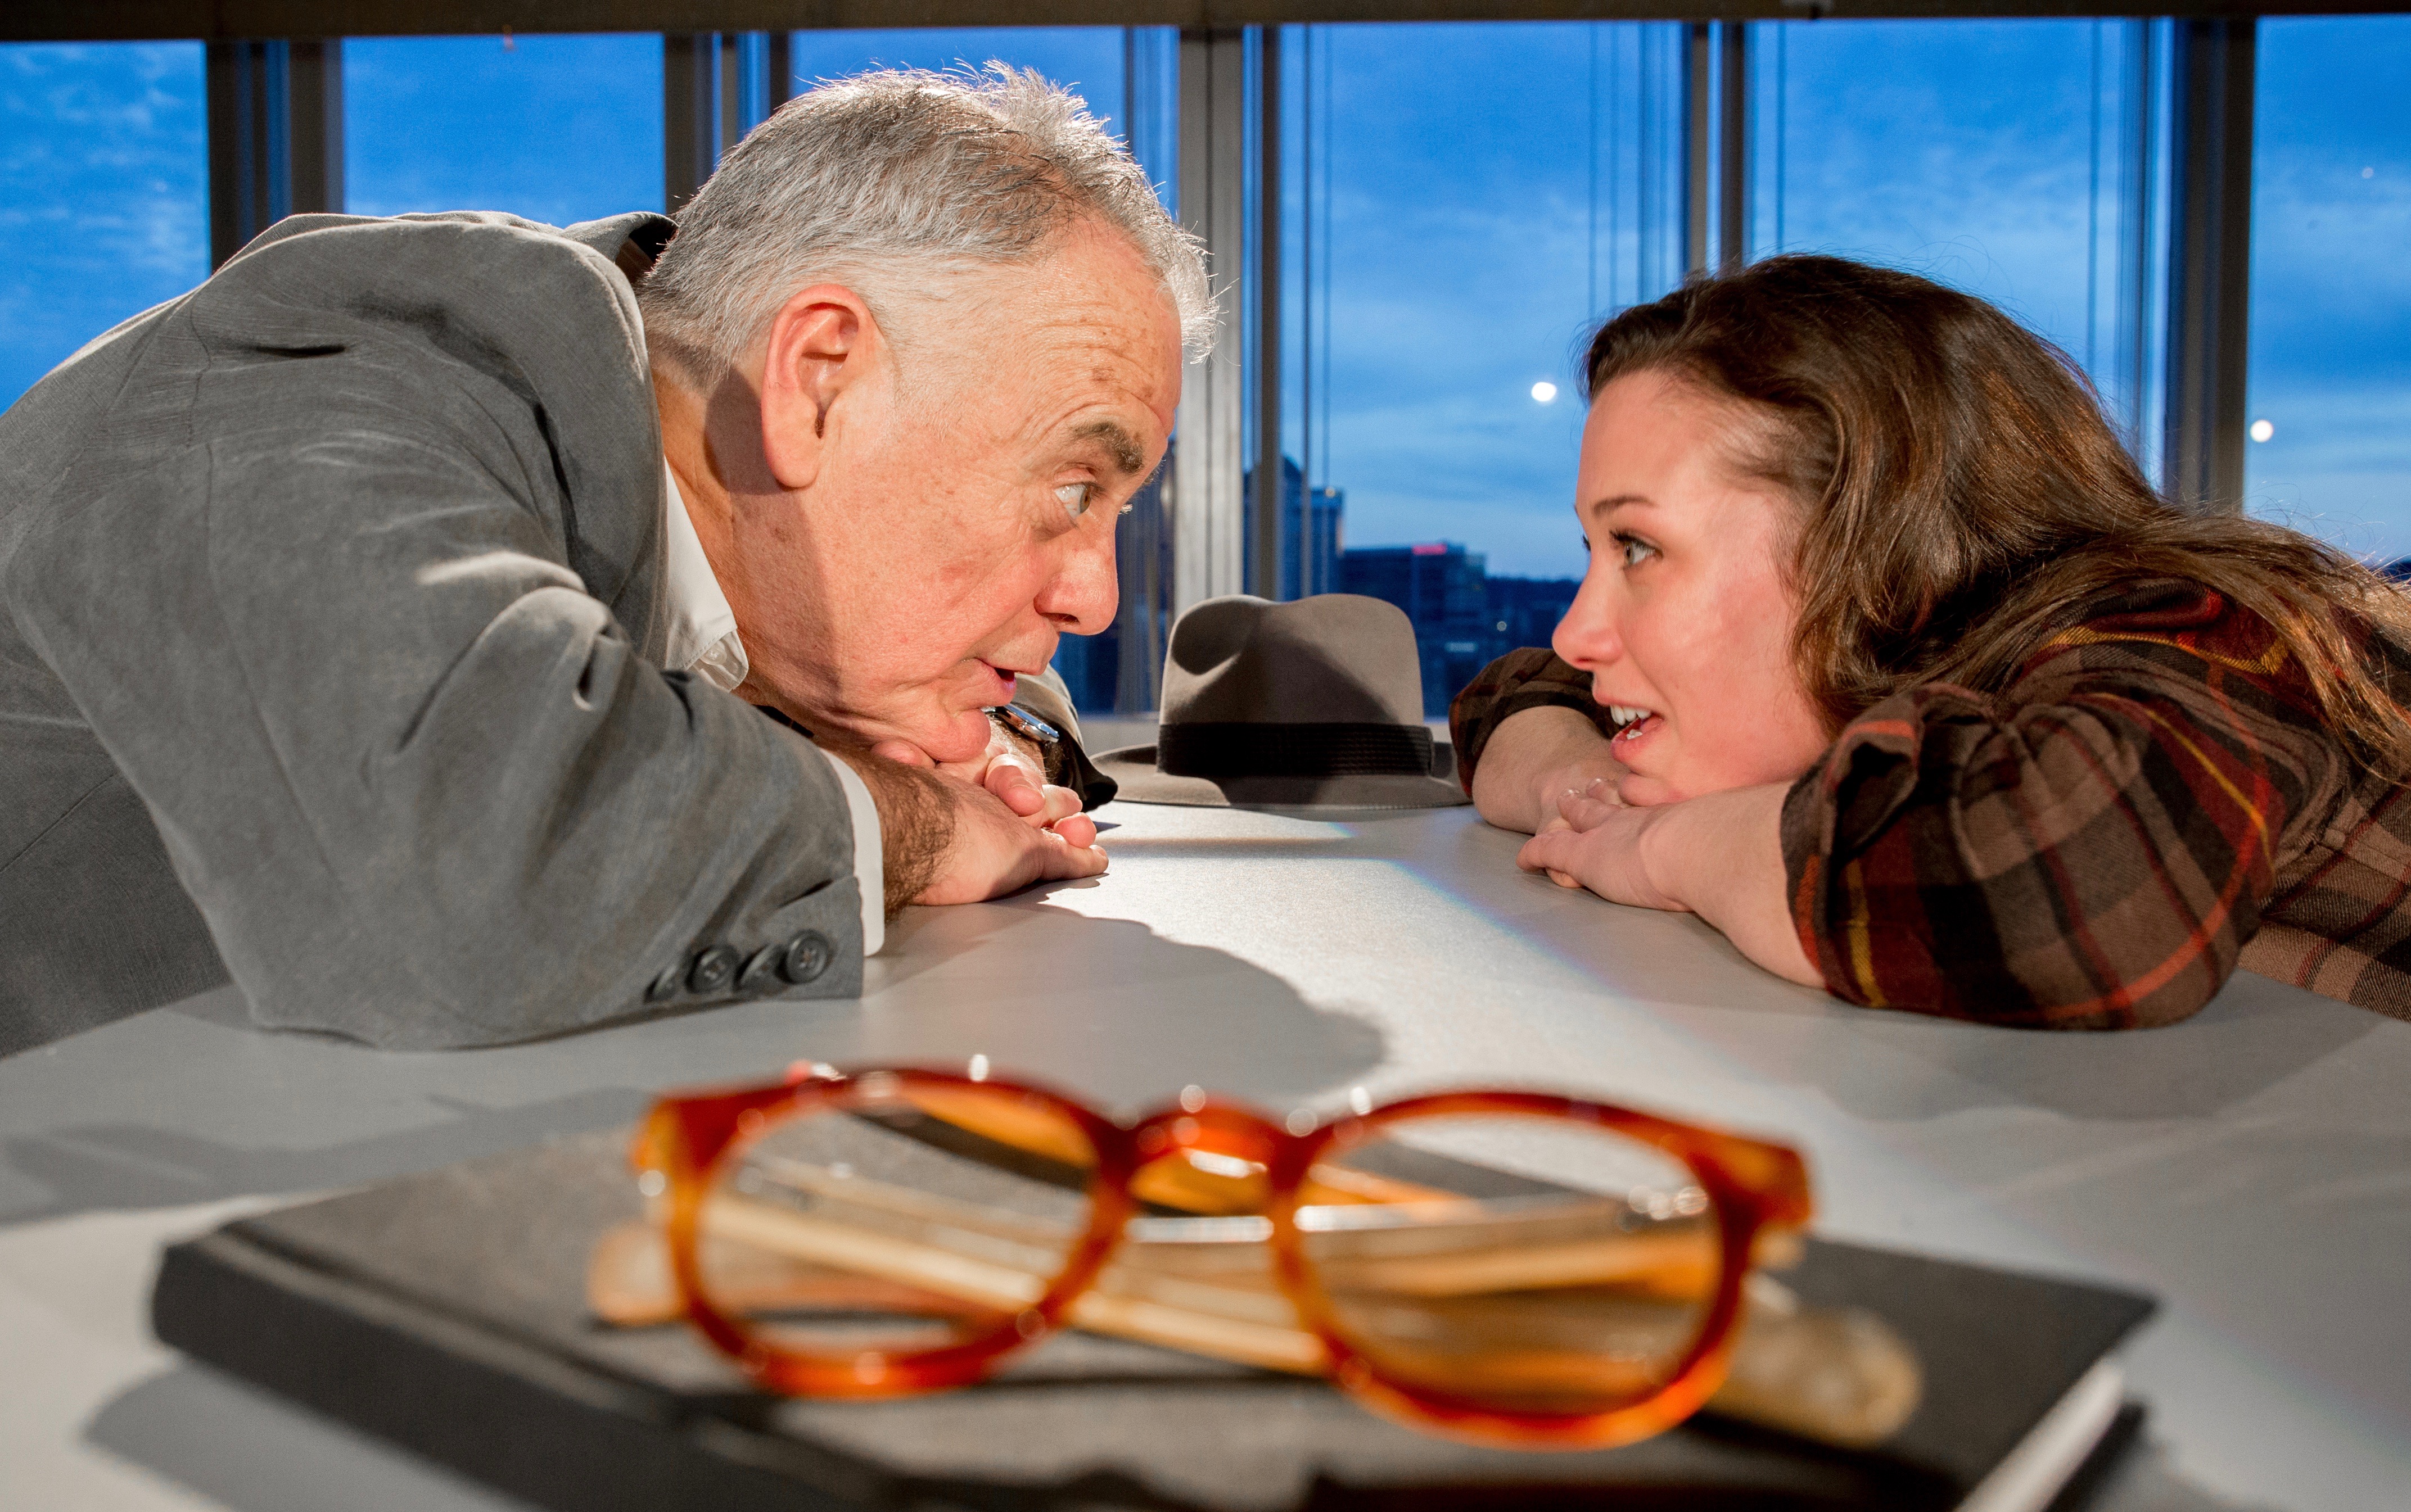 Master builder Solness (John Shepard) and Hilda (Hayley Nielsen) see eye-to-eye, but not clearly: Solness isn't wearing his reality specs.